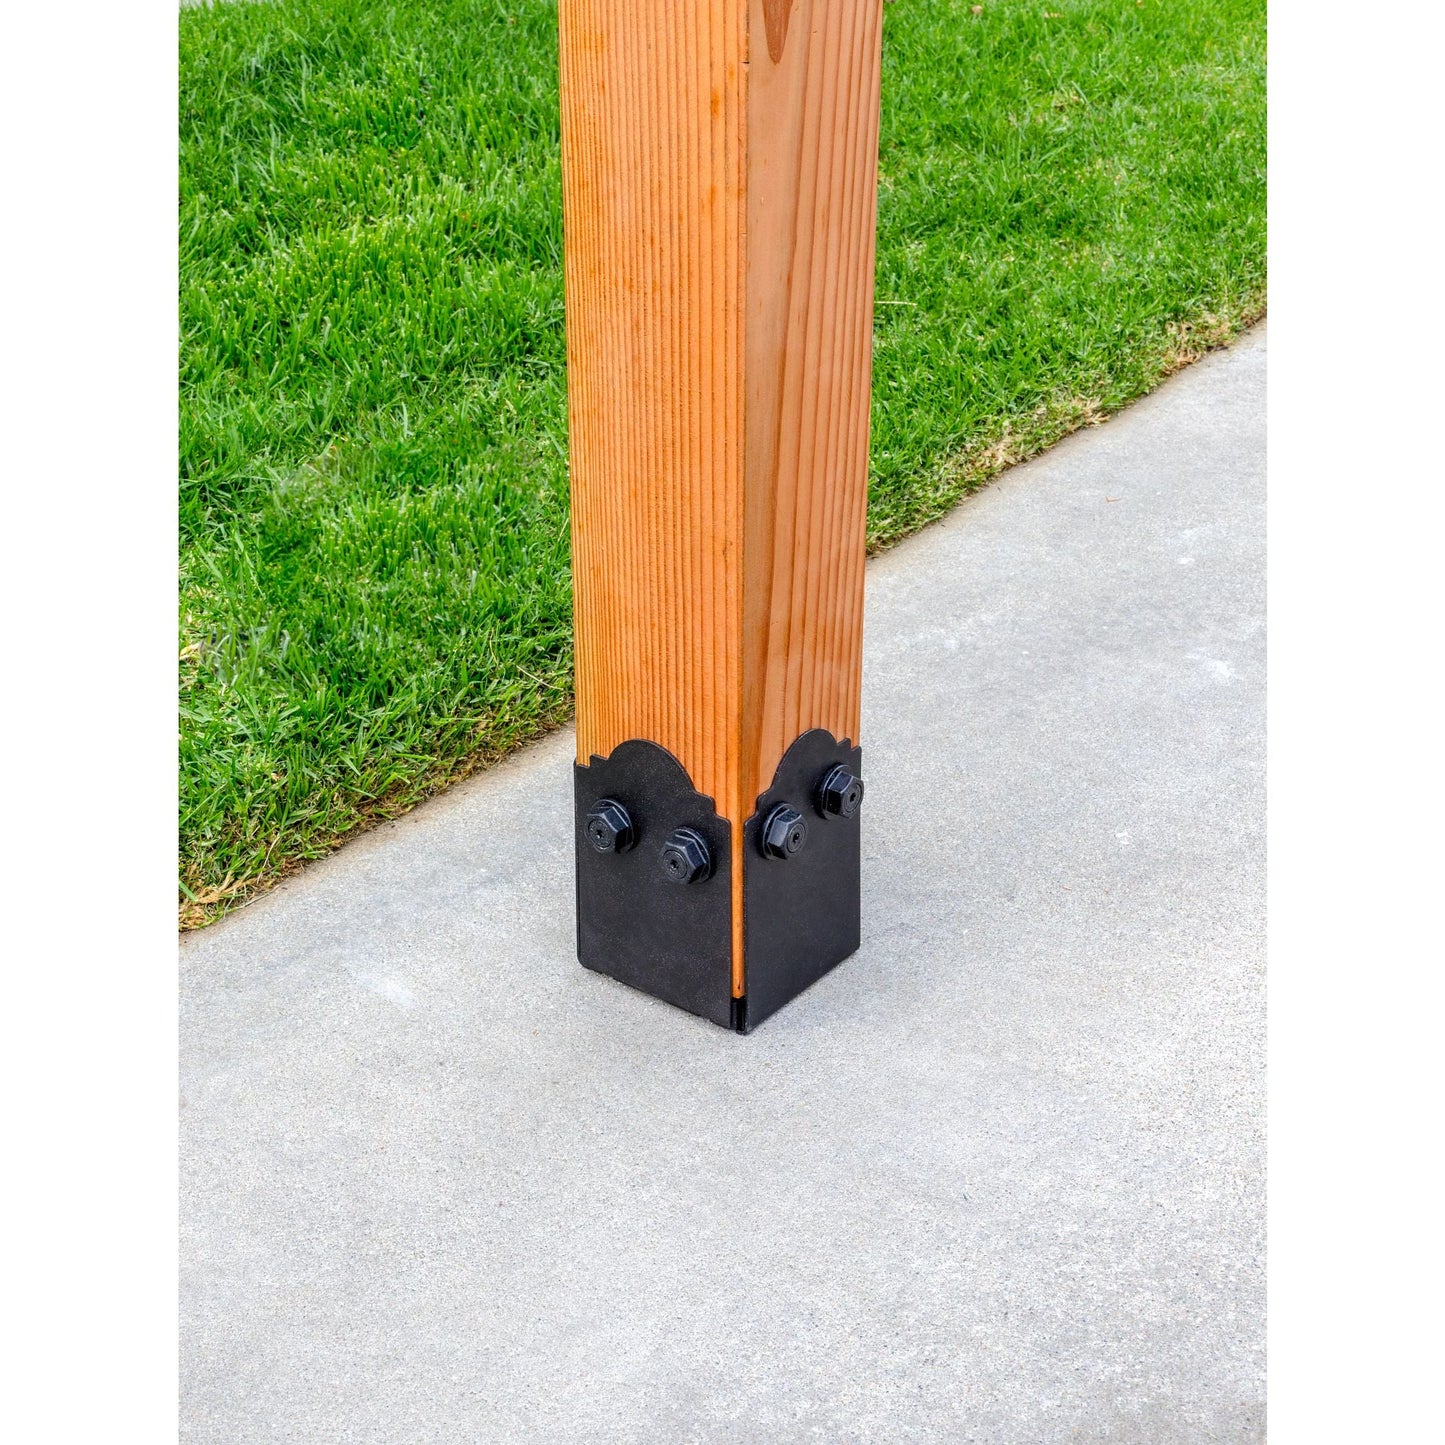 Simpson Black APB66DSP Outdoor Accents With Required Hardware